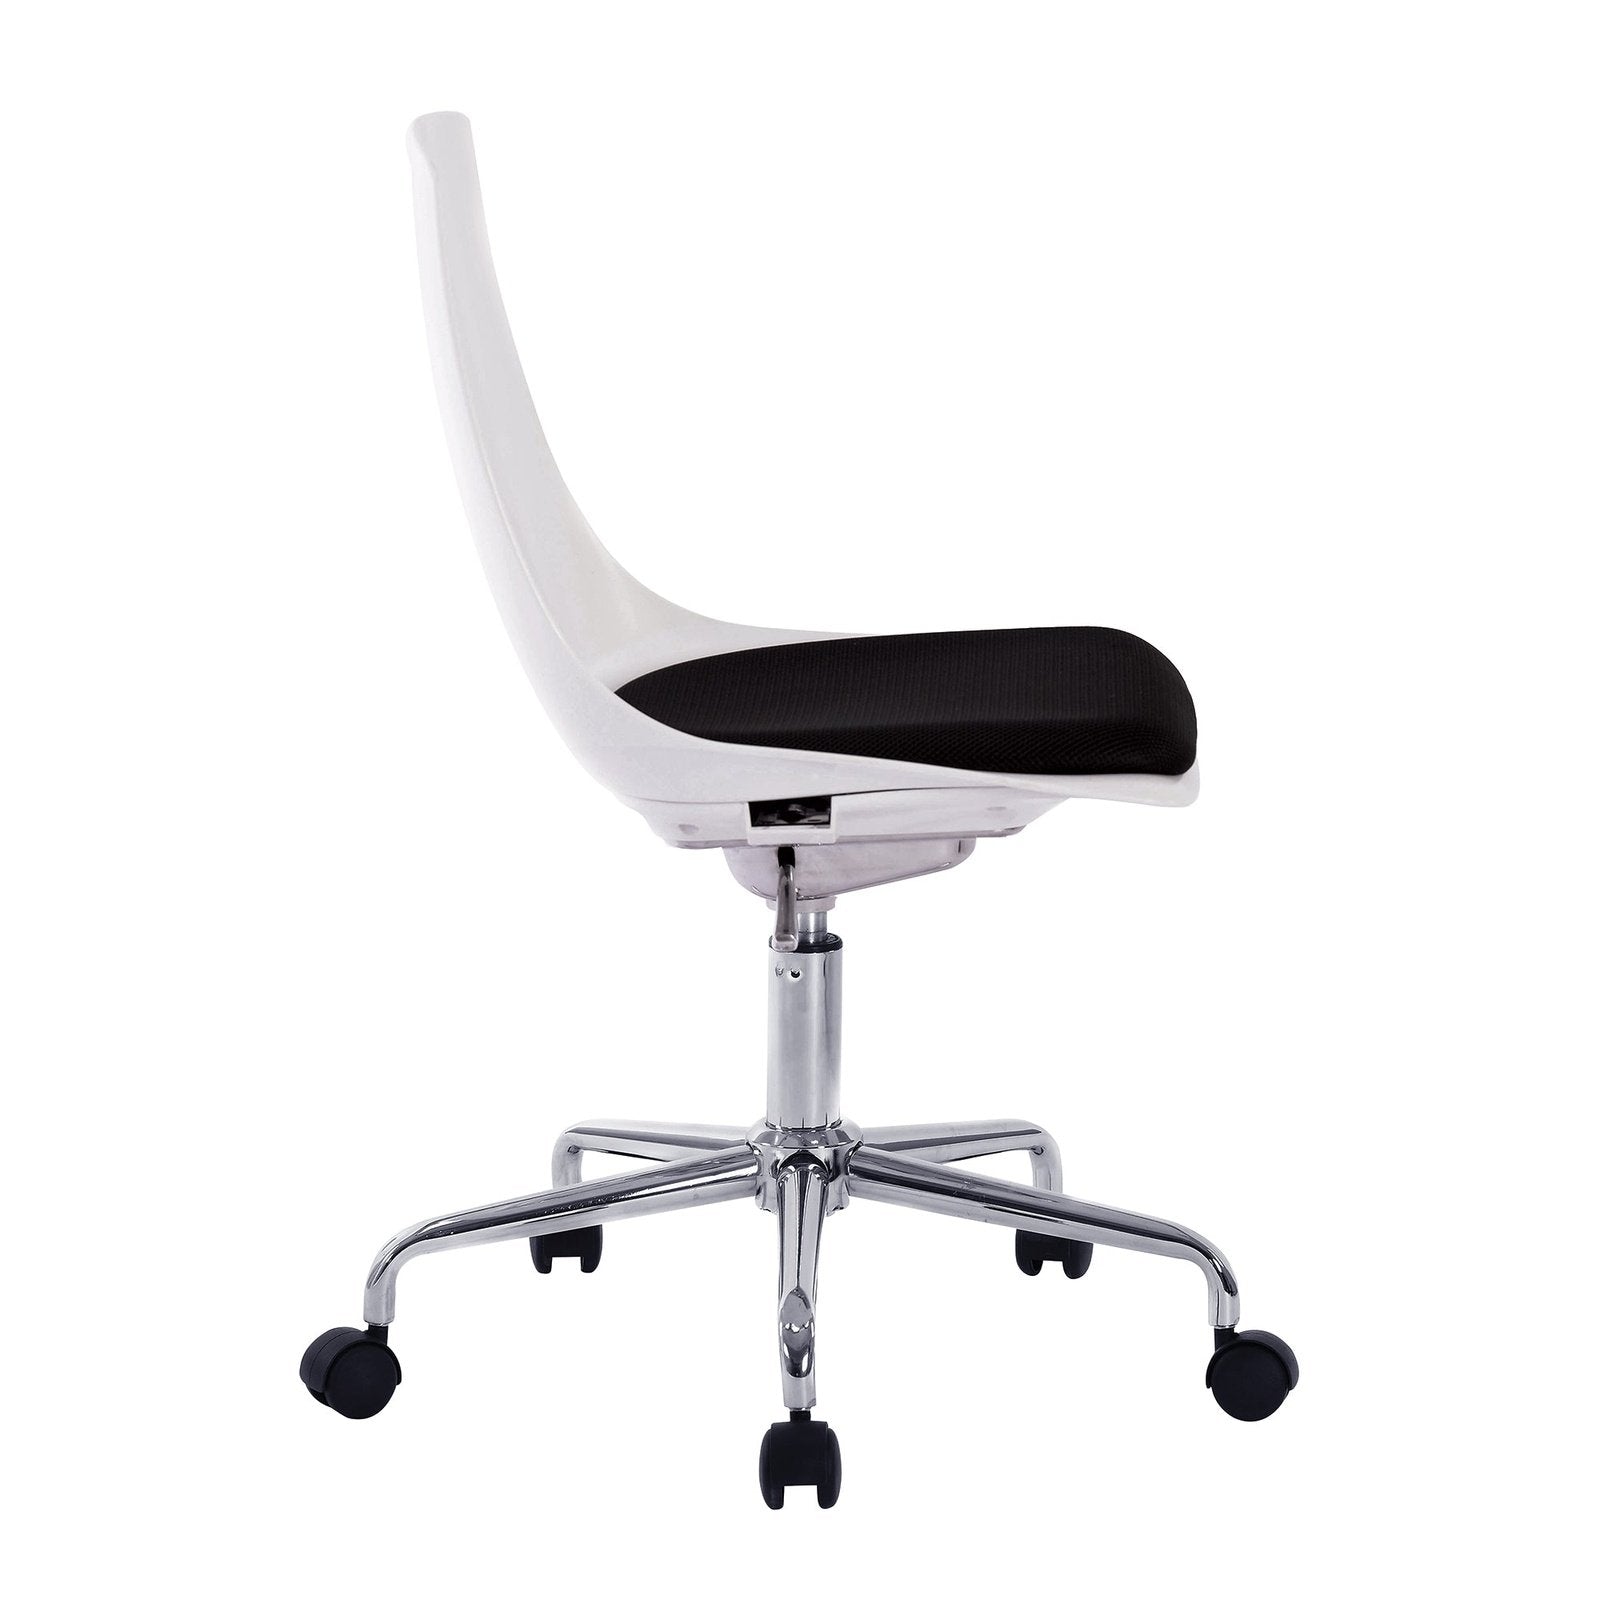 Designer Poly Swivel Chair with White Shell and Chrome Base - Office Products Online